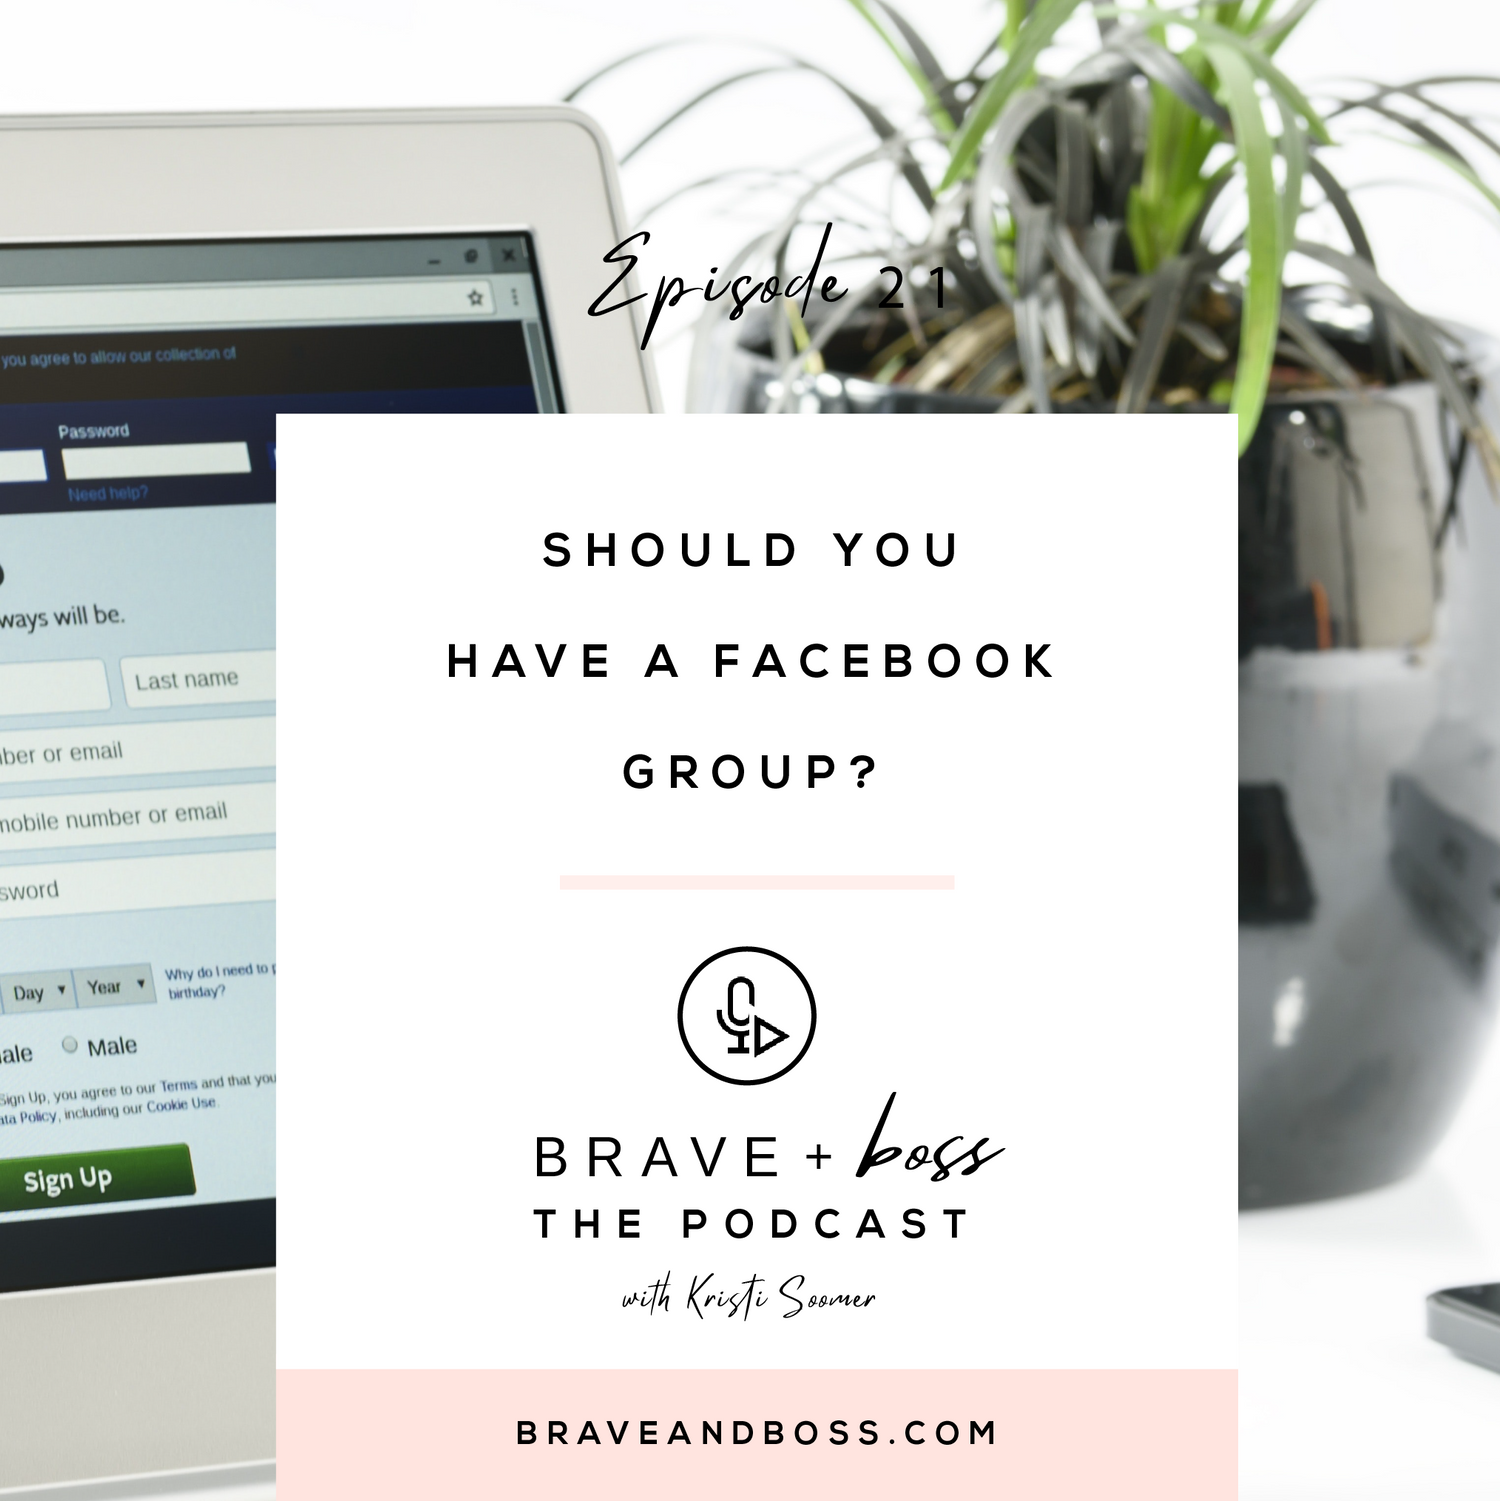 Should you have a Facebook group?